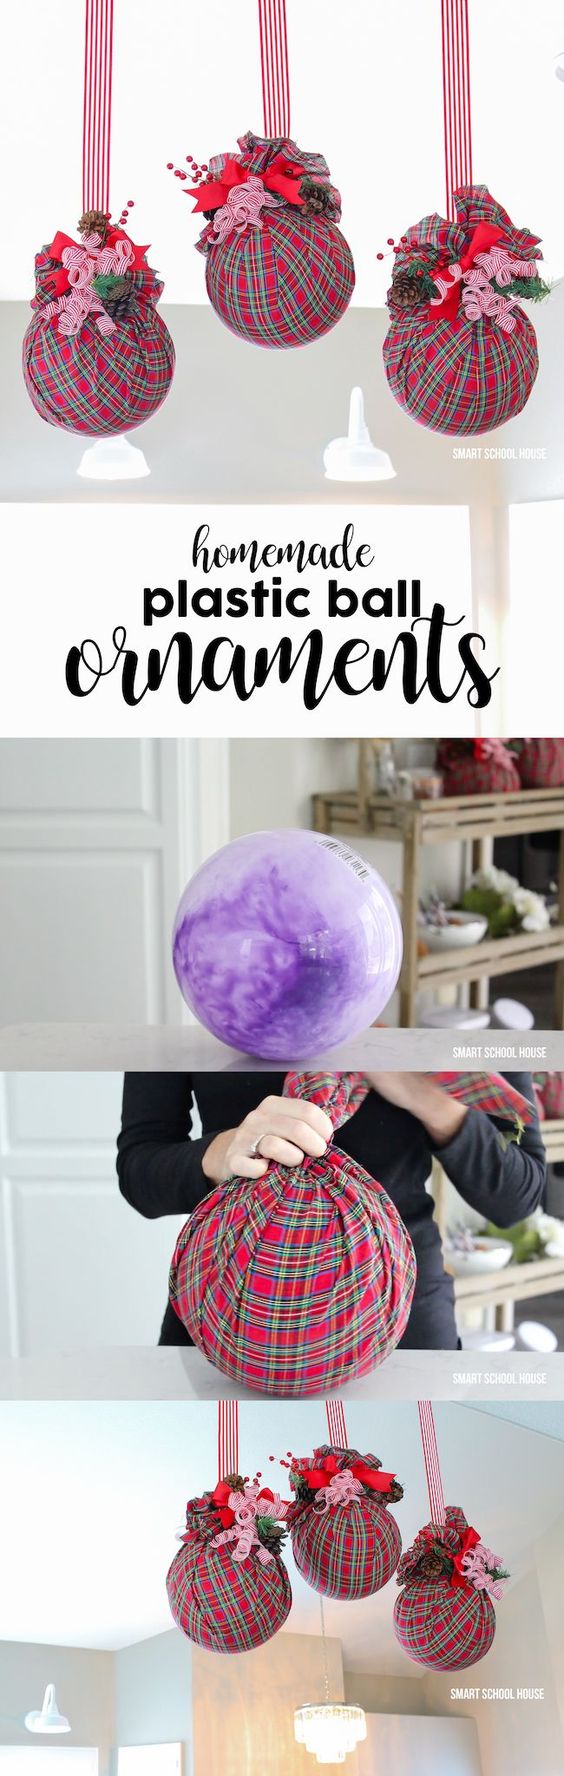 How to make Large Ornaments 